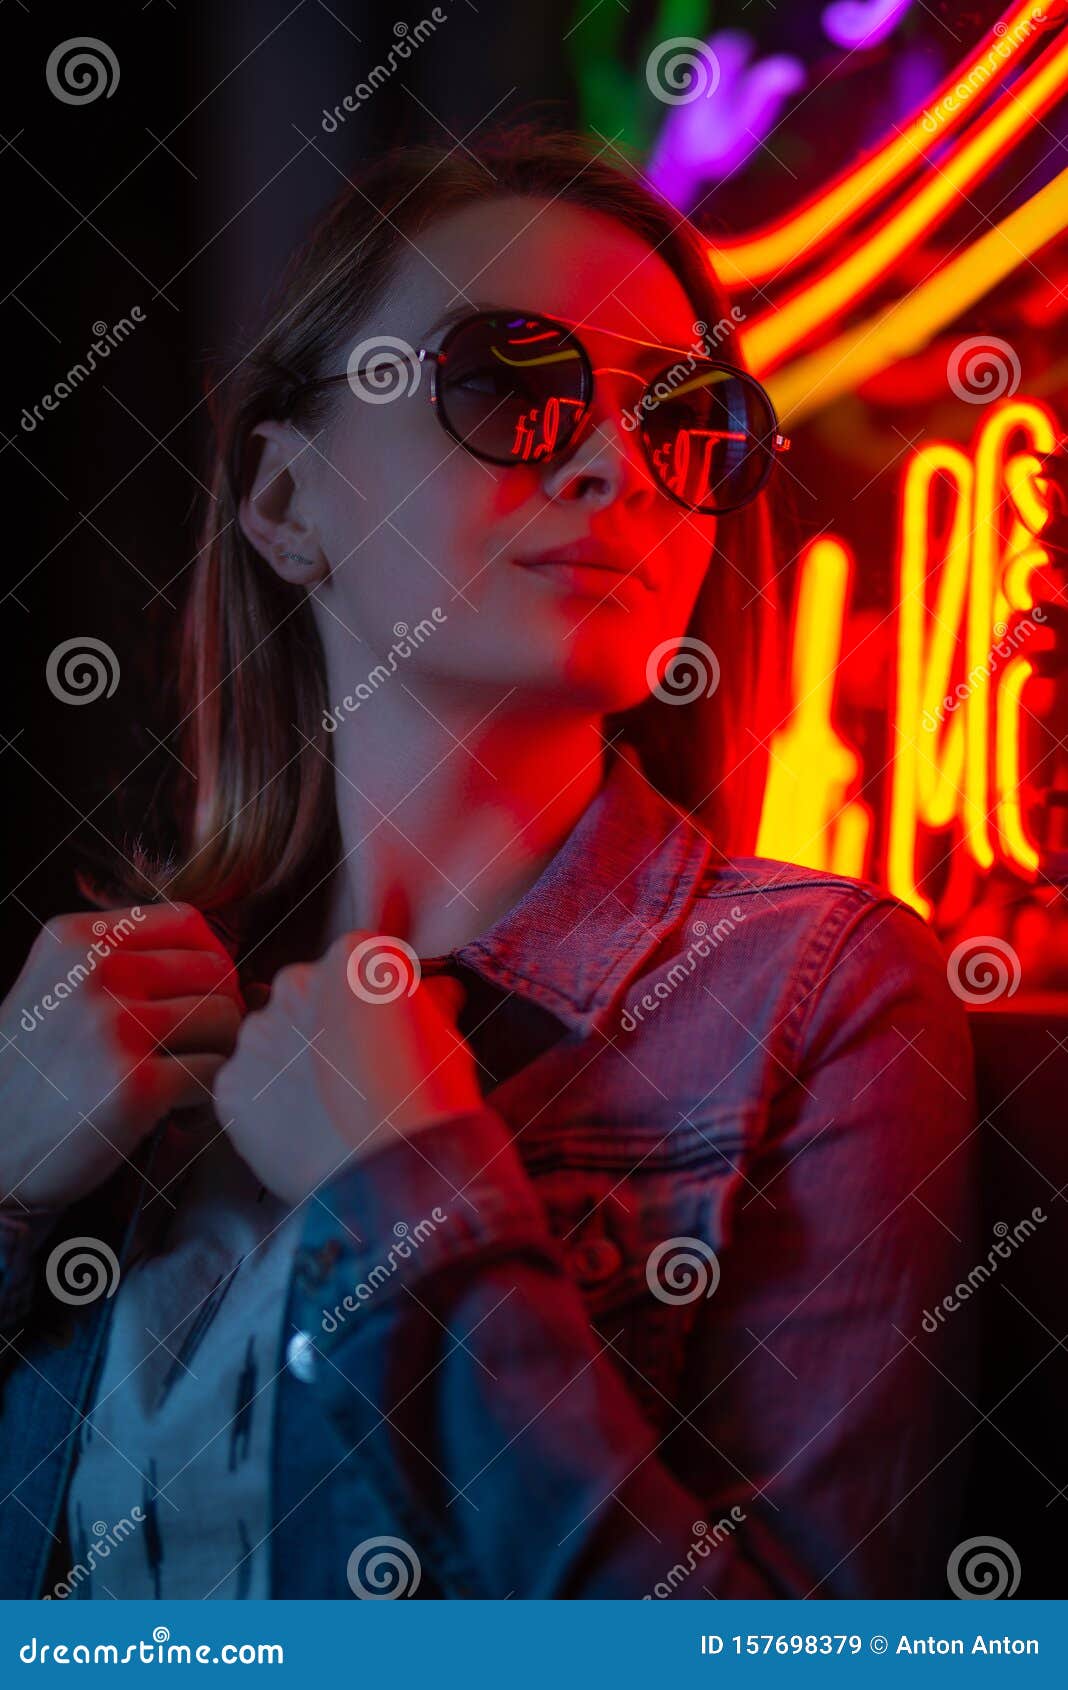 Creative Portrait of a Girl in Neon Lighting with Glasses Stock Image ...